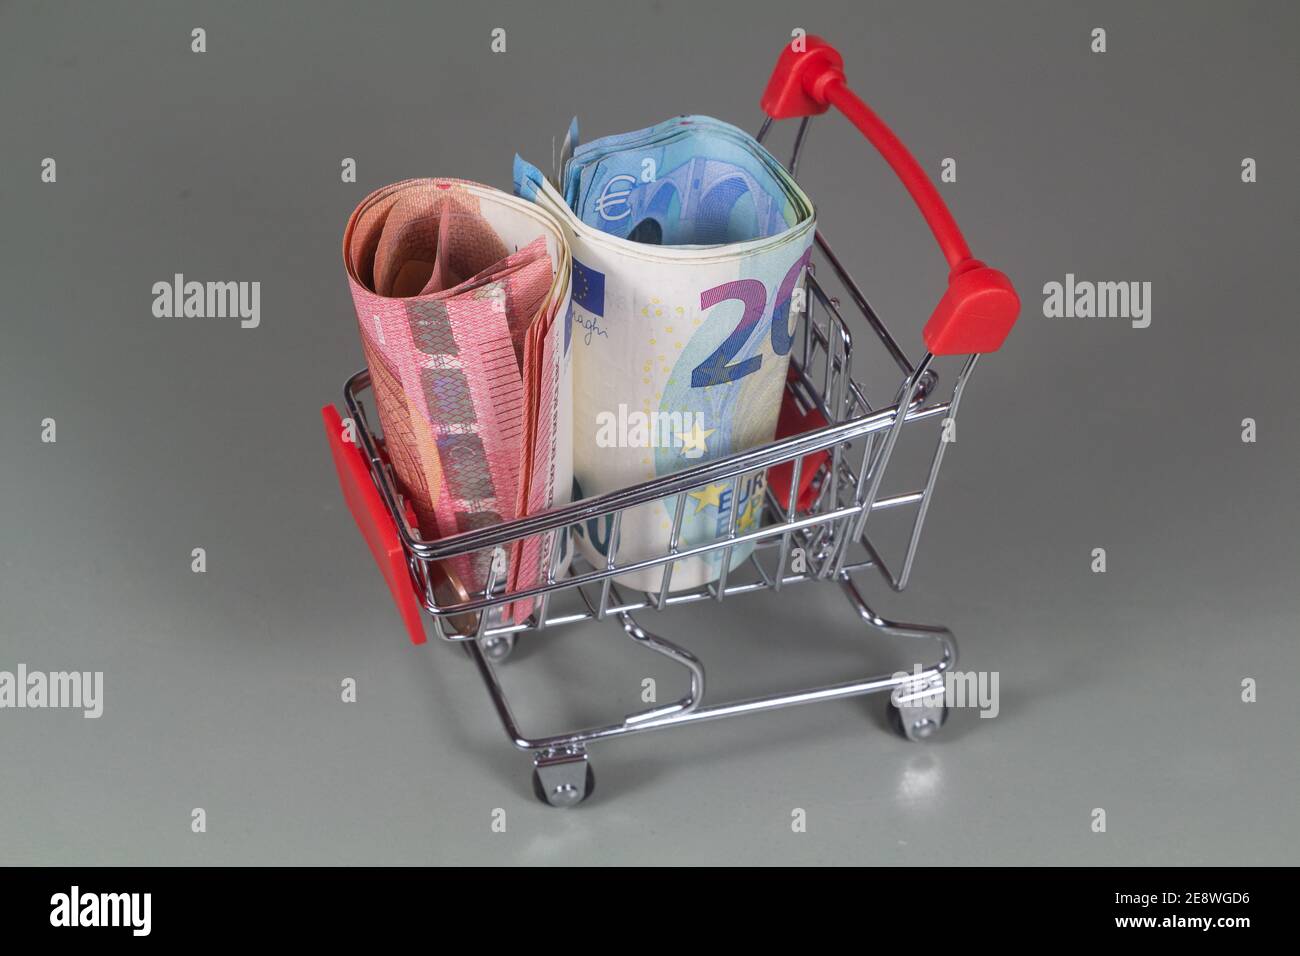 Small shopping cart and banknotes of ten and twenty euros Stock Photo